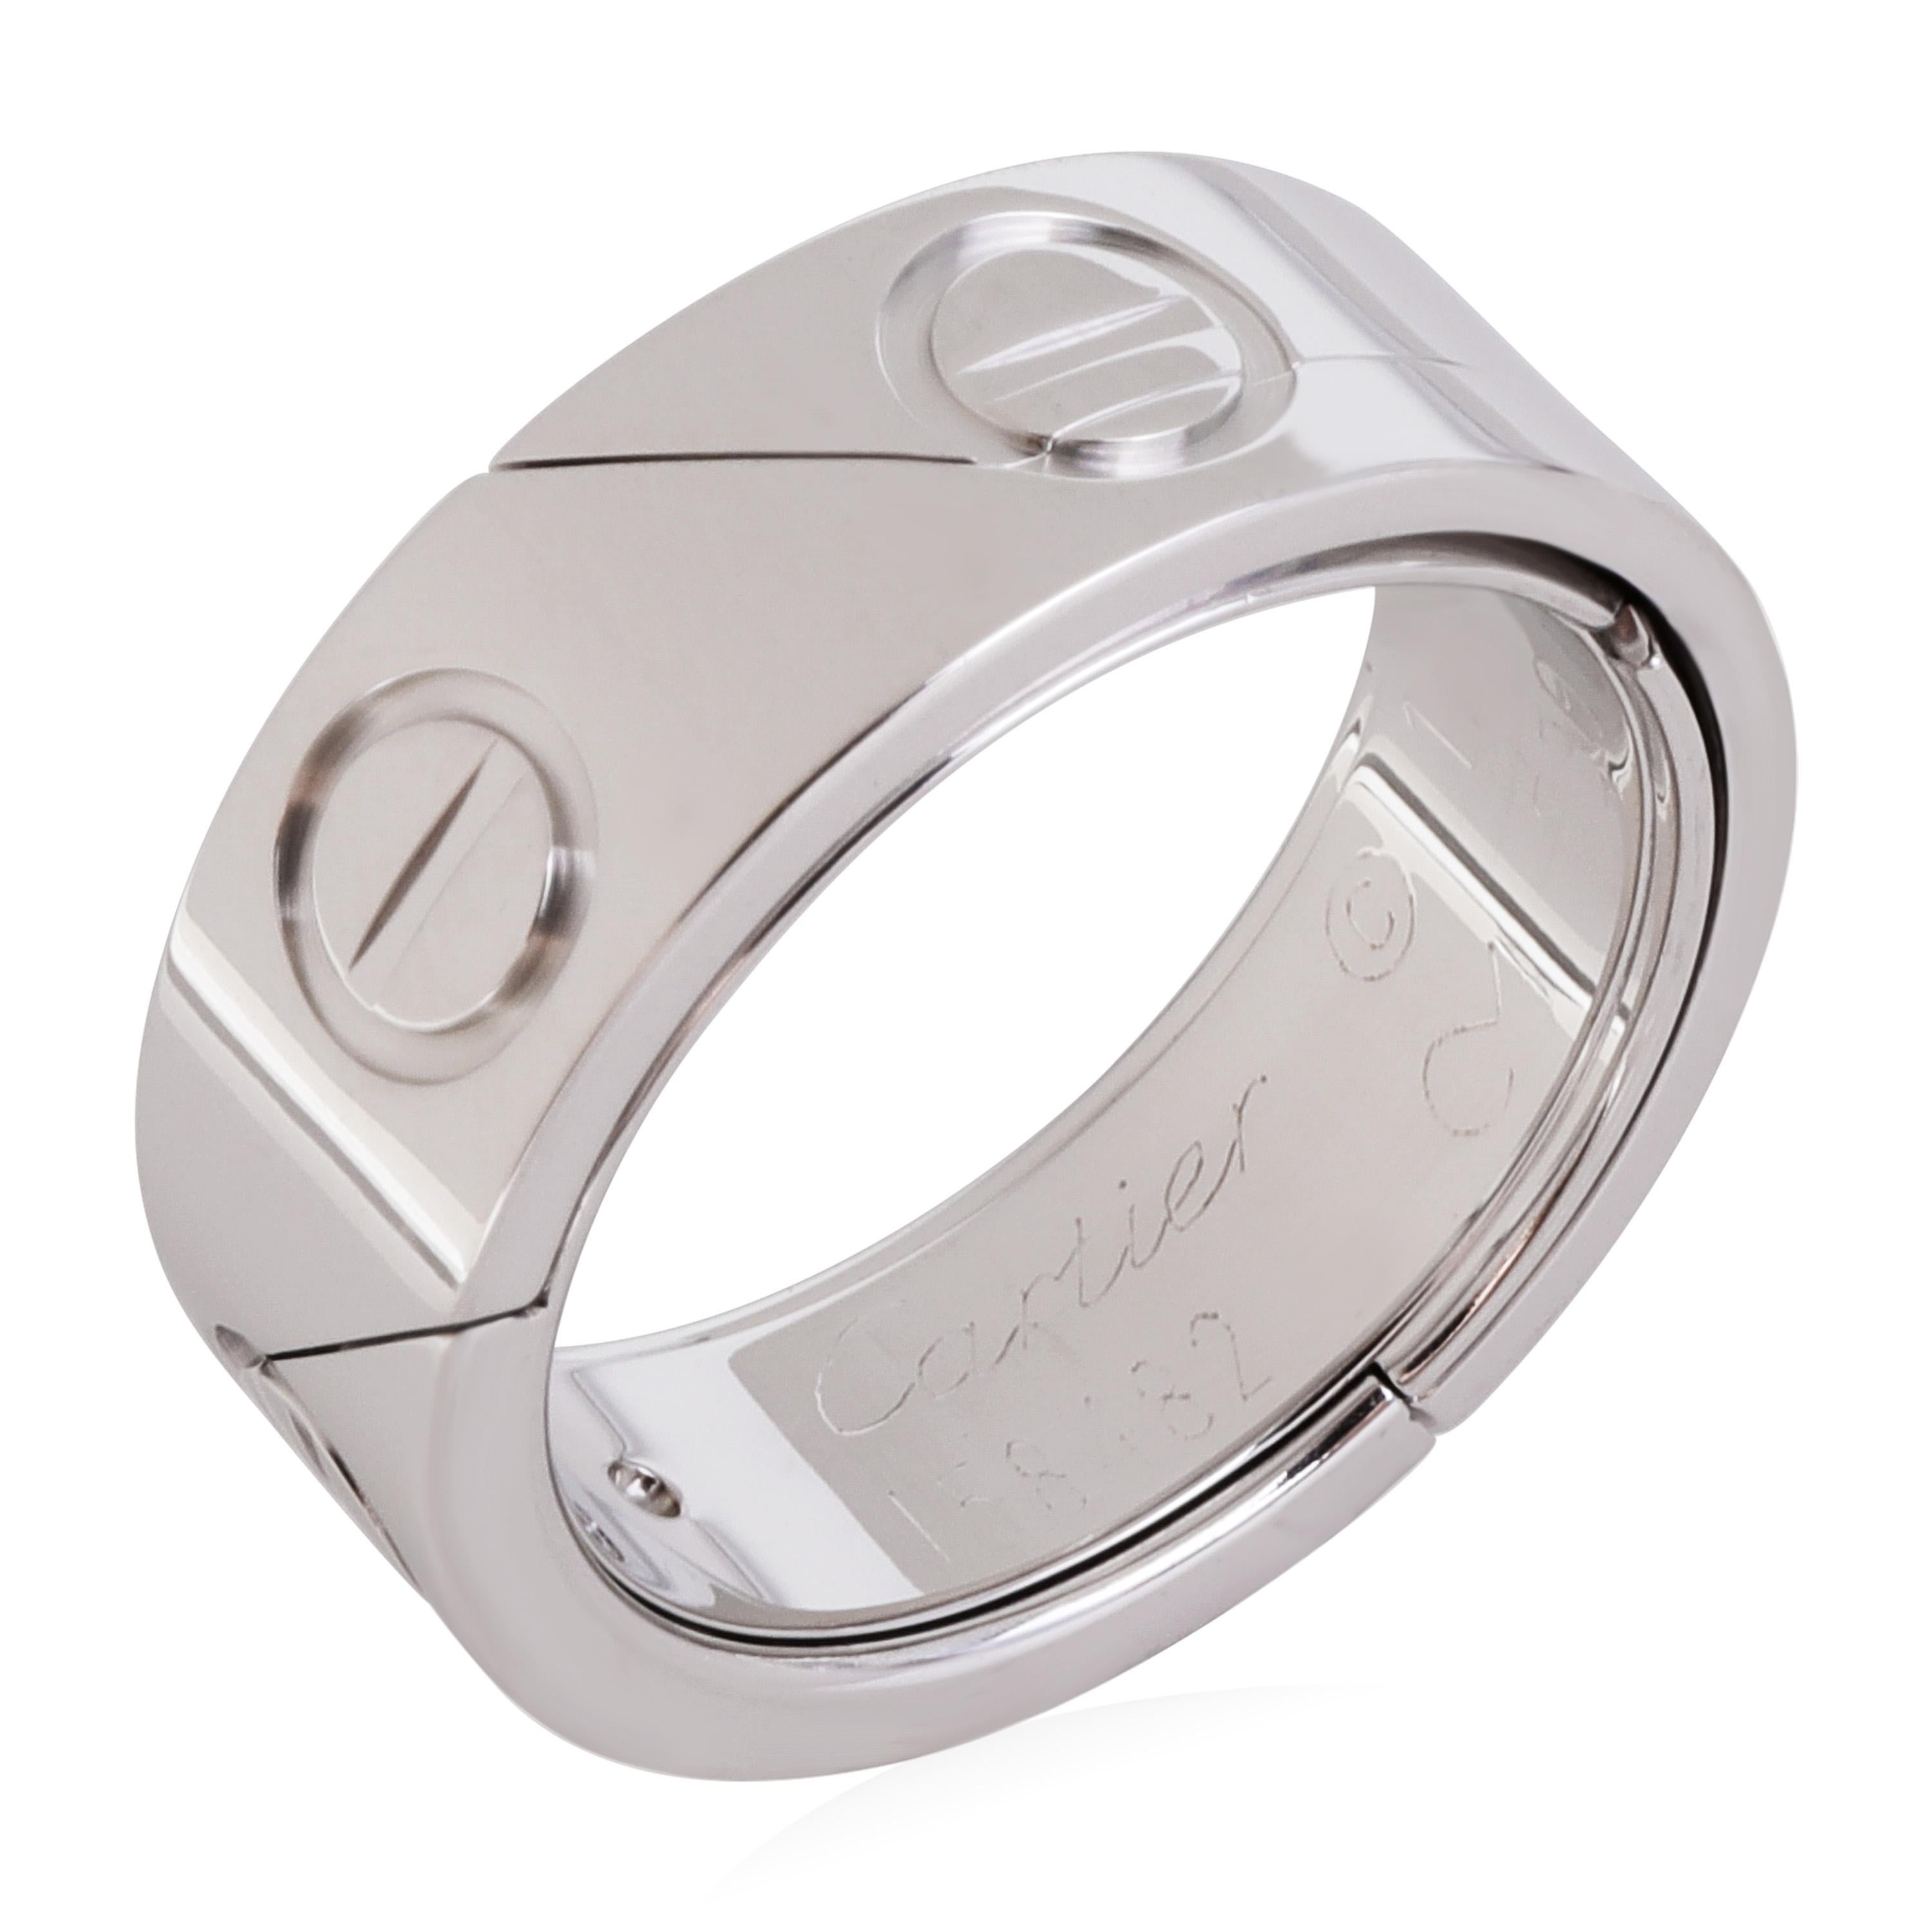 Cartier Love Ring in 18k White Gold

PRIMARY DETAILS
SKU: 119838
Listing Title: Cartier Love Ring in 18k White Gold
Condition Description: Retails for 3,500 USD. In excellent condition and recently polished. The ring size is 5.75. Comes with